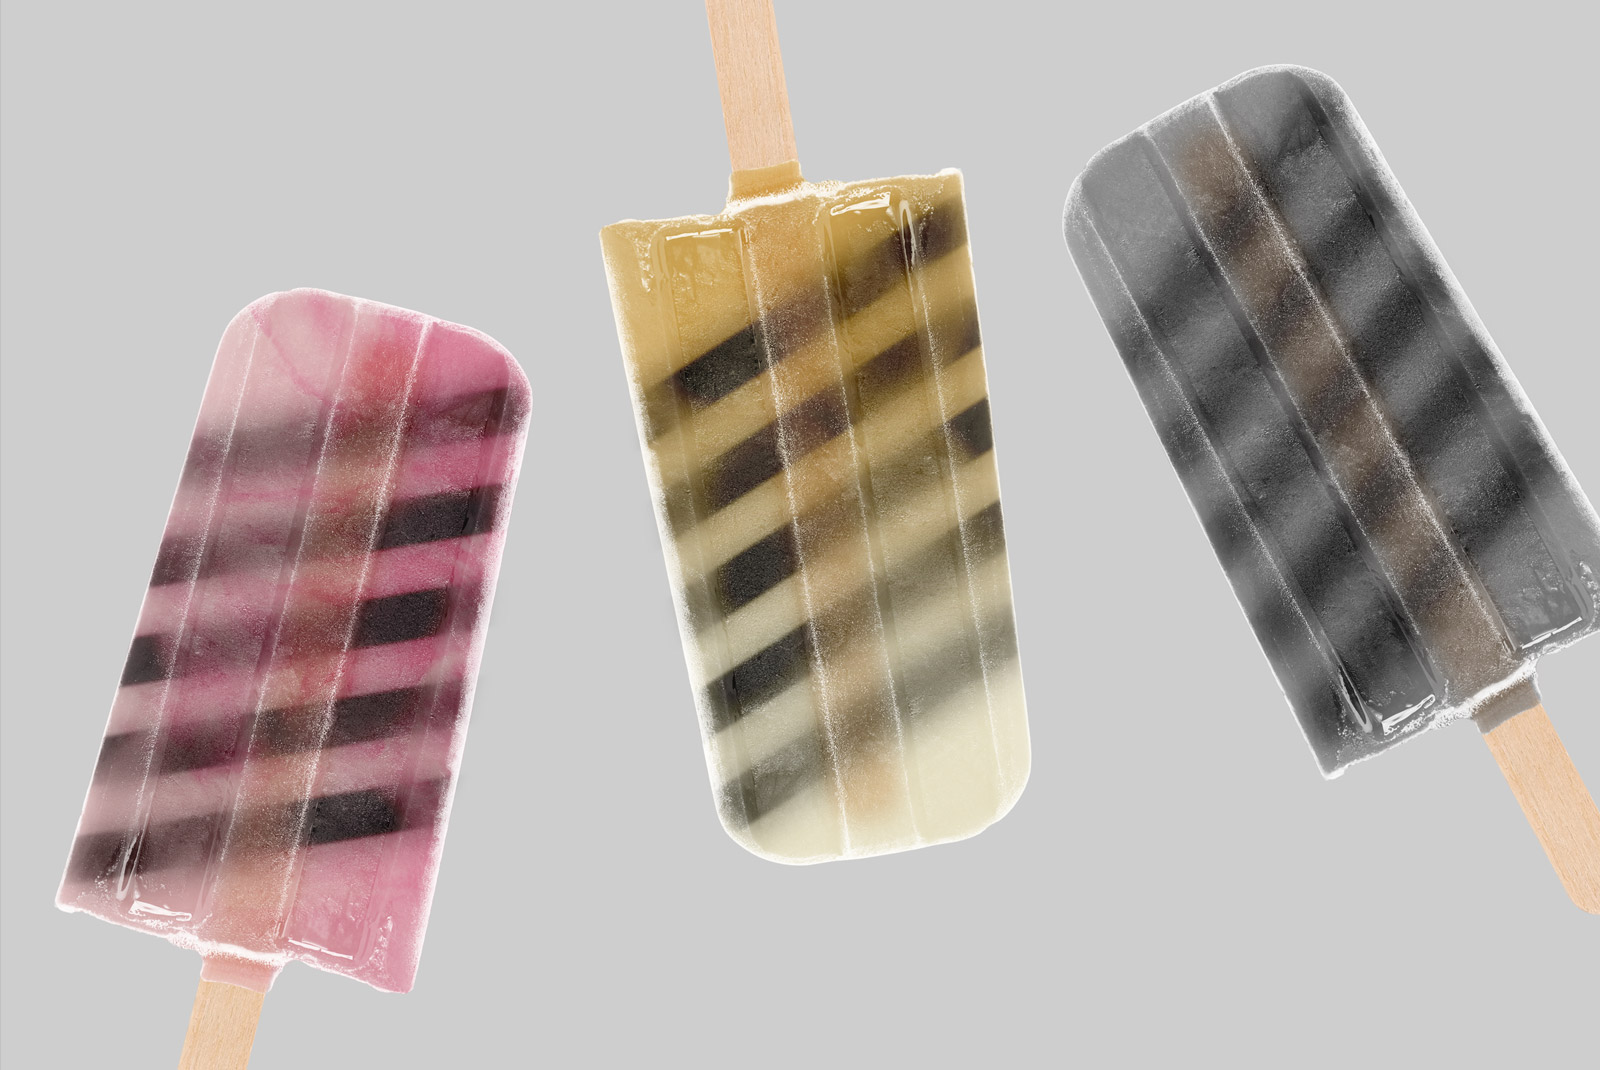 Realistic popsicle mockups with transparent background, featuring three flavors, ideal for food-related graphic design.